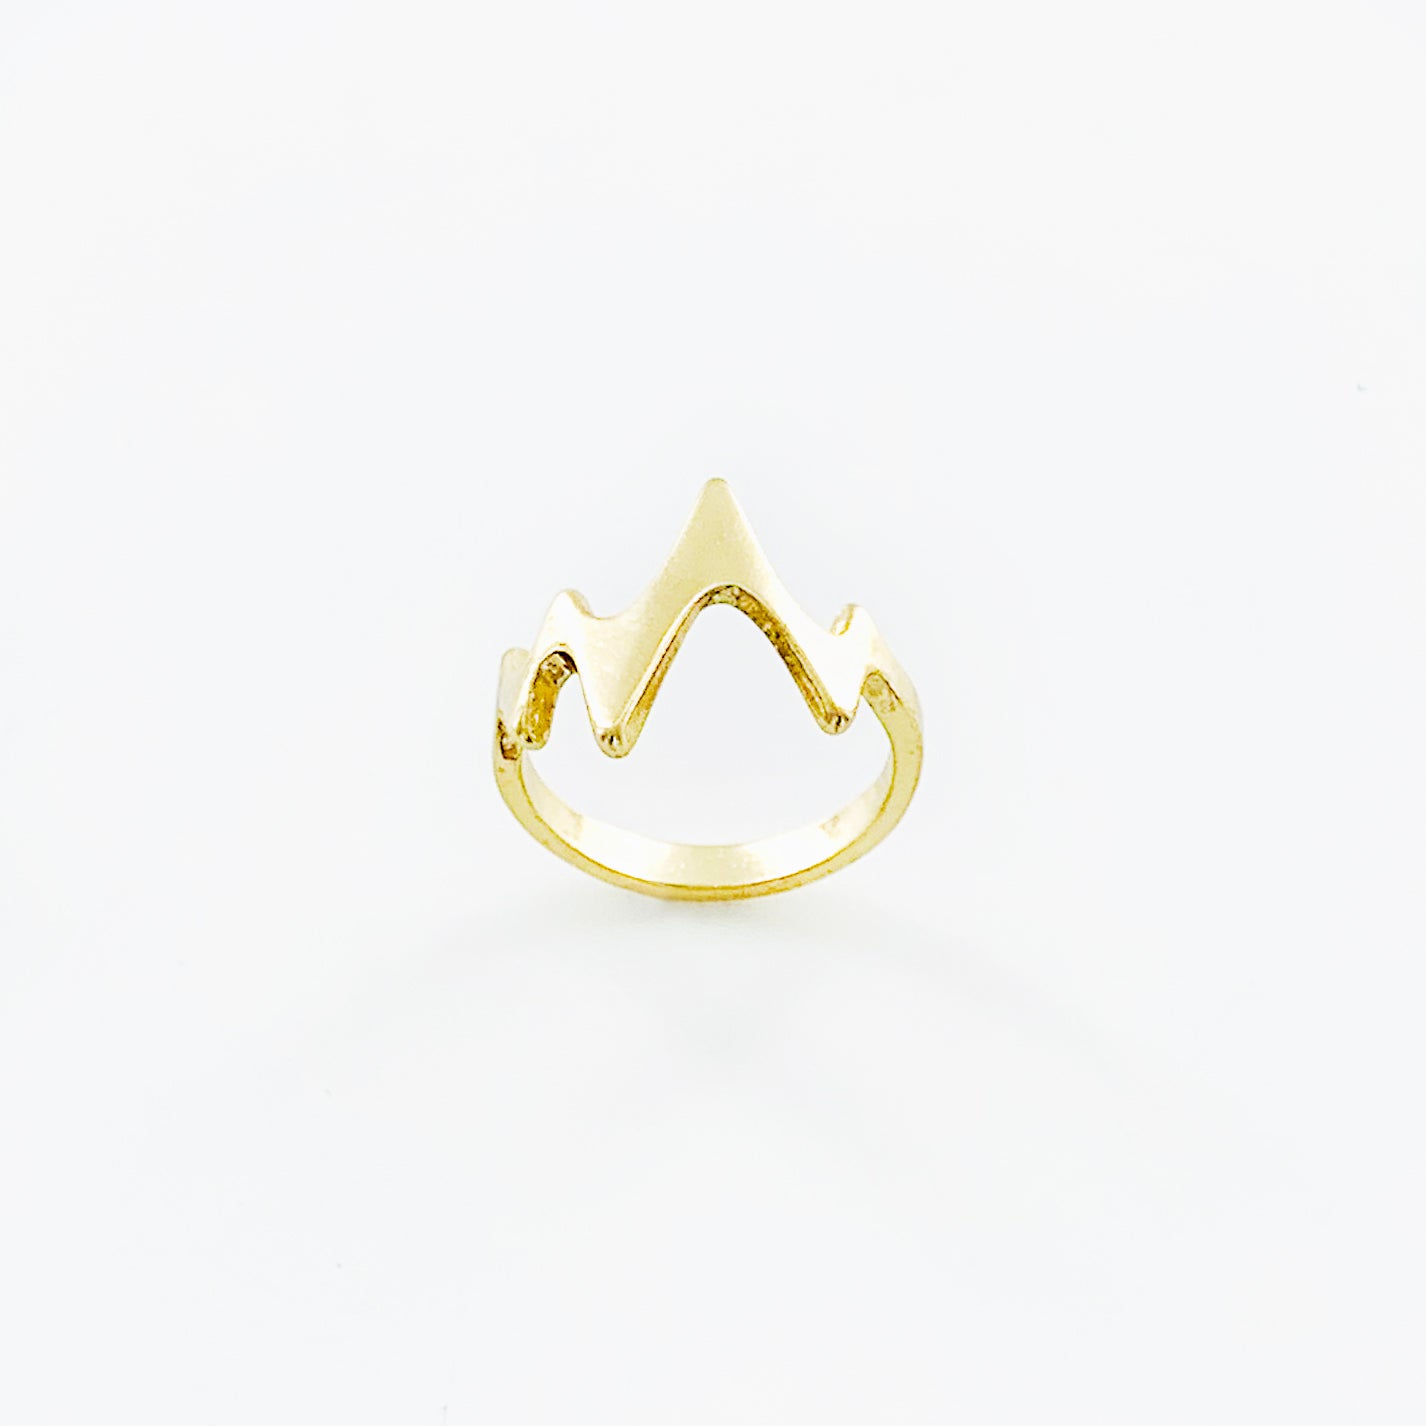 Gold ring with zig zag design